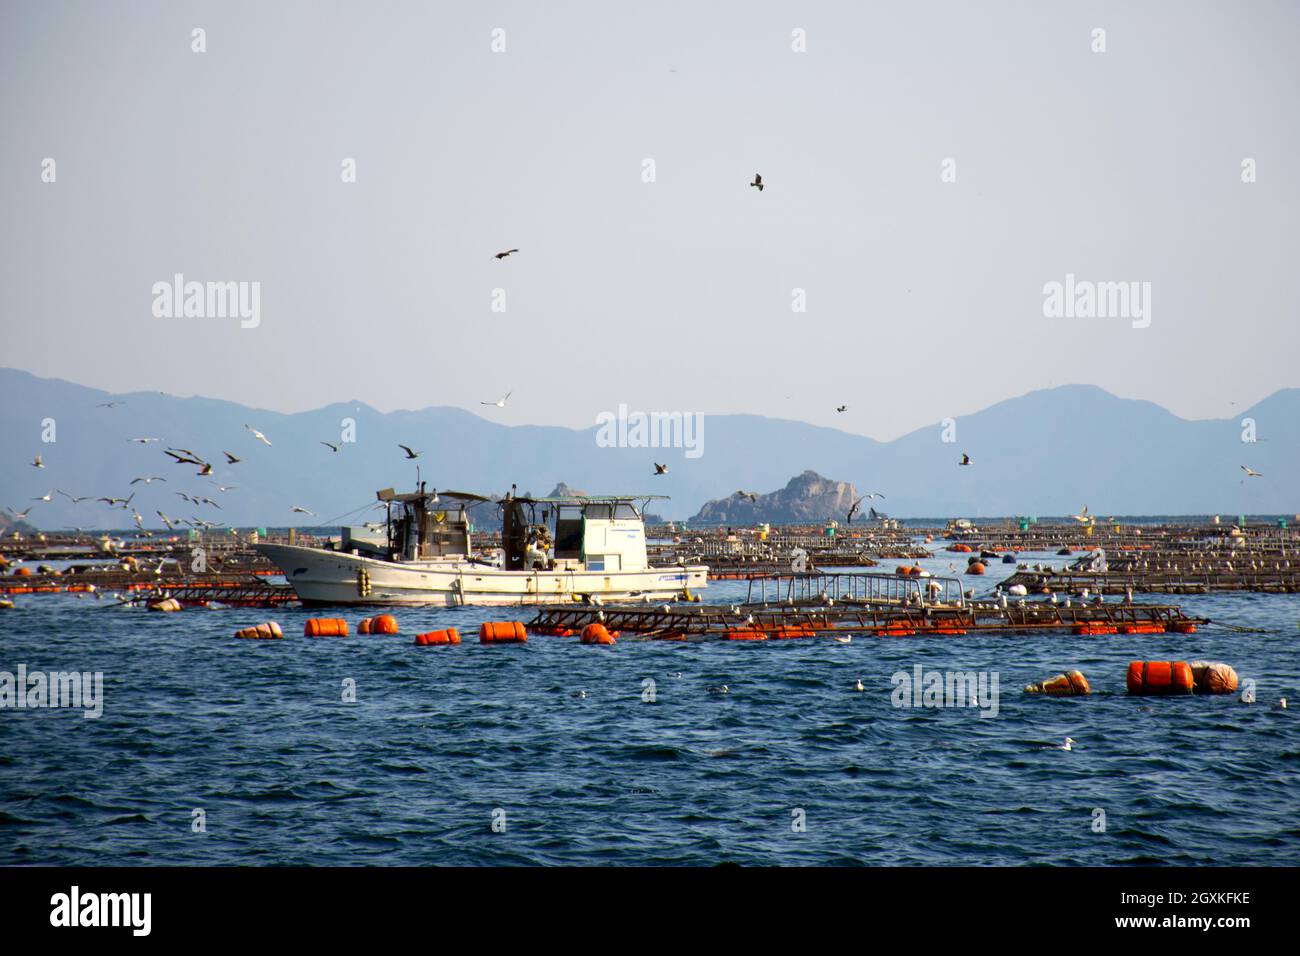 Aquaculture pans for red seabream, Pagrus major, Ainan, Japan Stock Photo